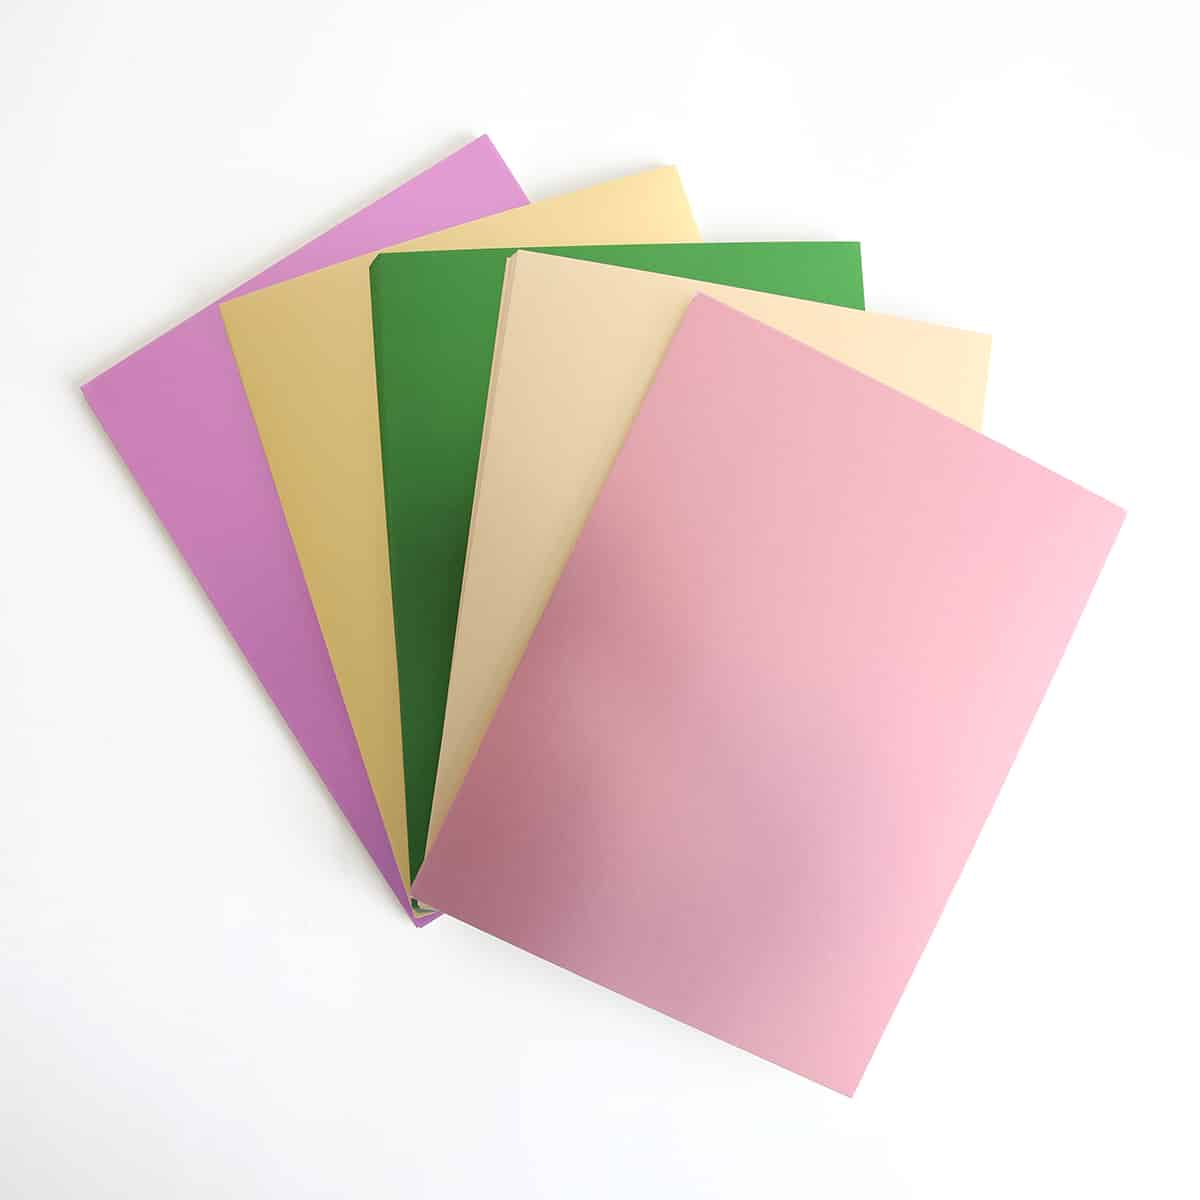 five different colors of paper on a white surface.